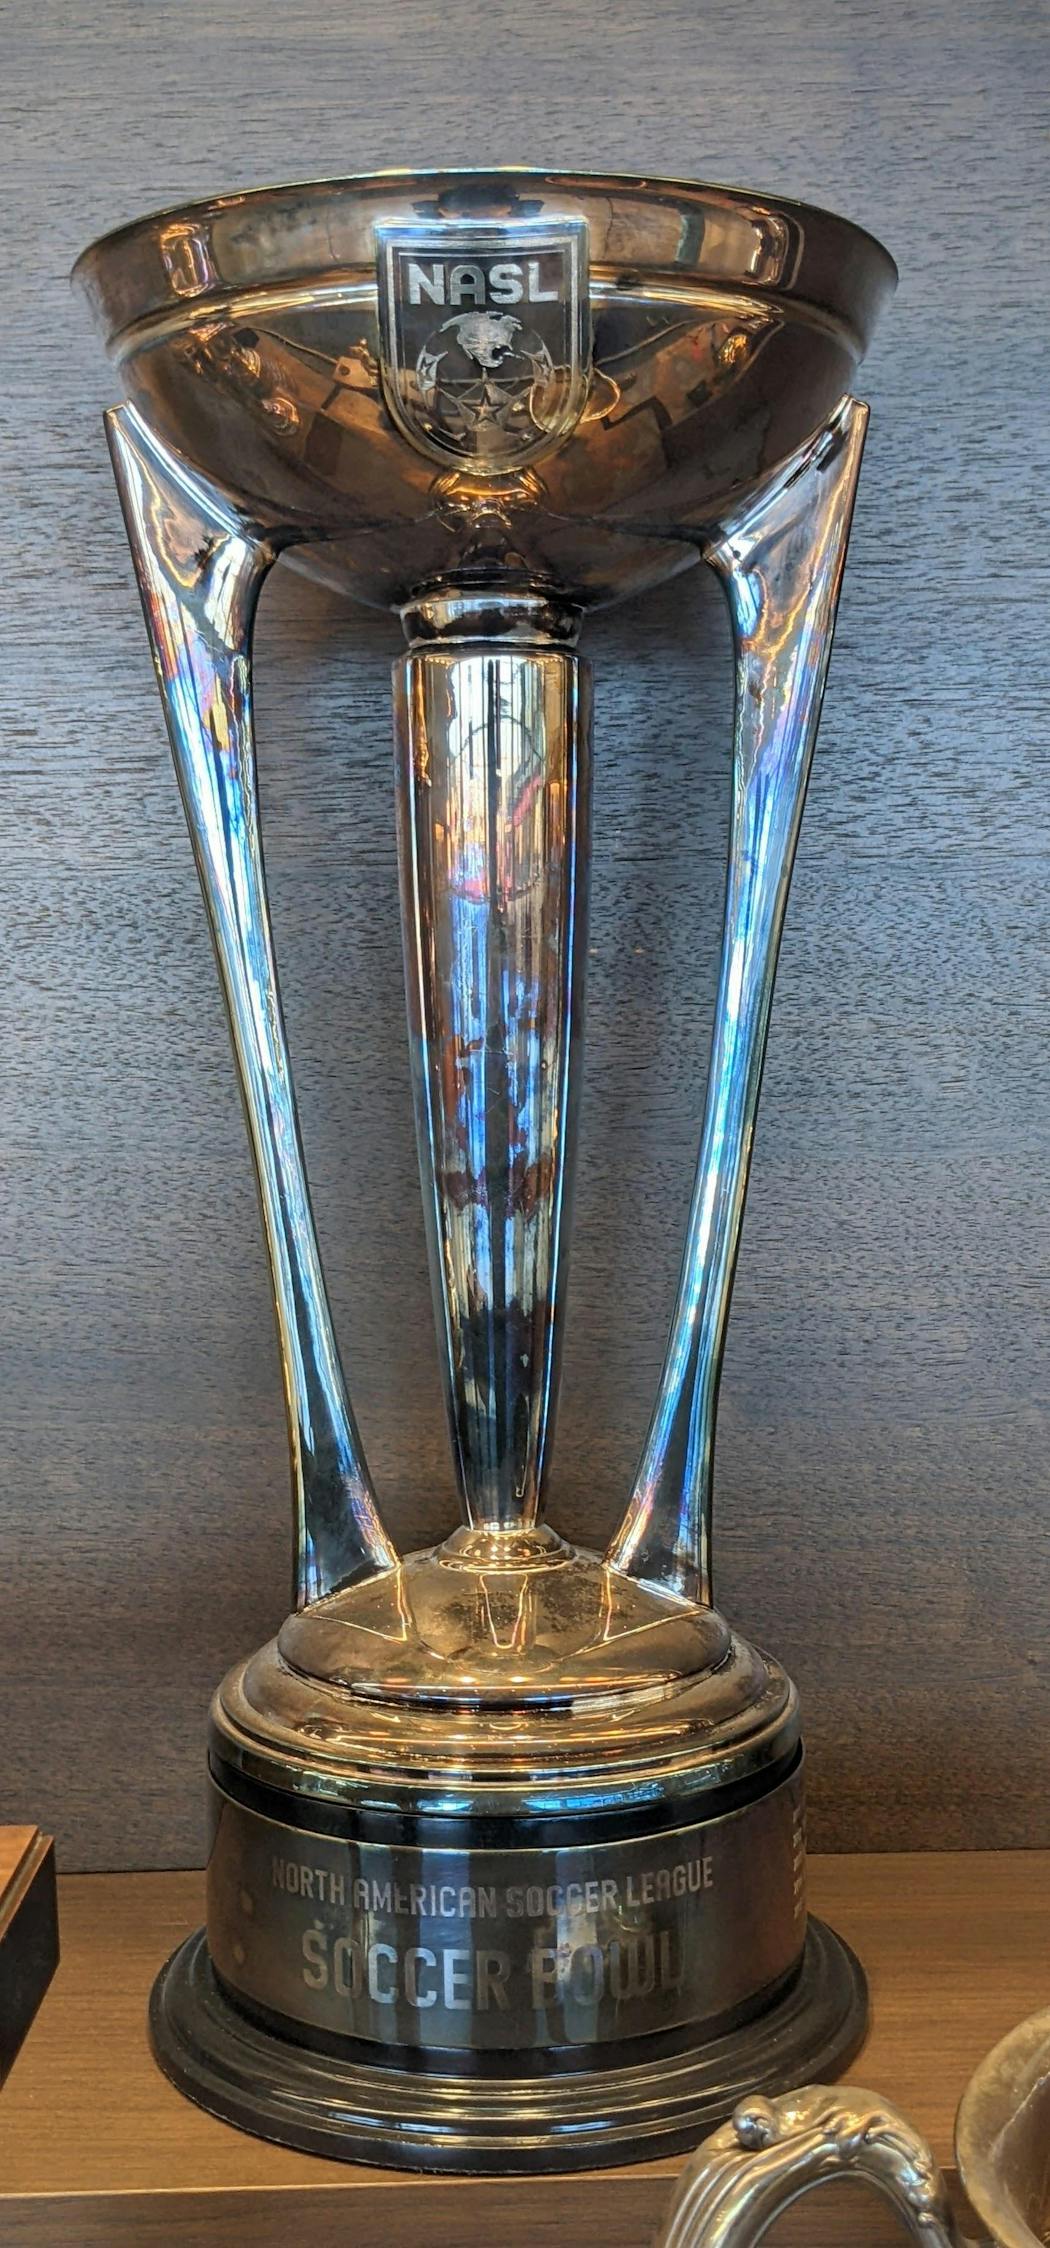 Loons fans who traveled together on a full plane to Dallas Monday stopped at the National Soccer Hall of Fame connected to Toyota Stadium to admire the 2011 NASL Soccer Bowl trophy won by the Minnesota Stars.